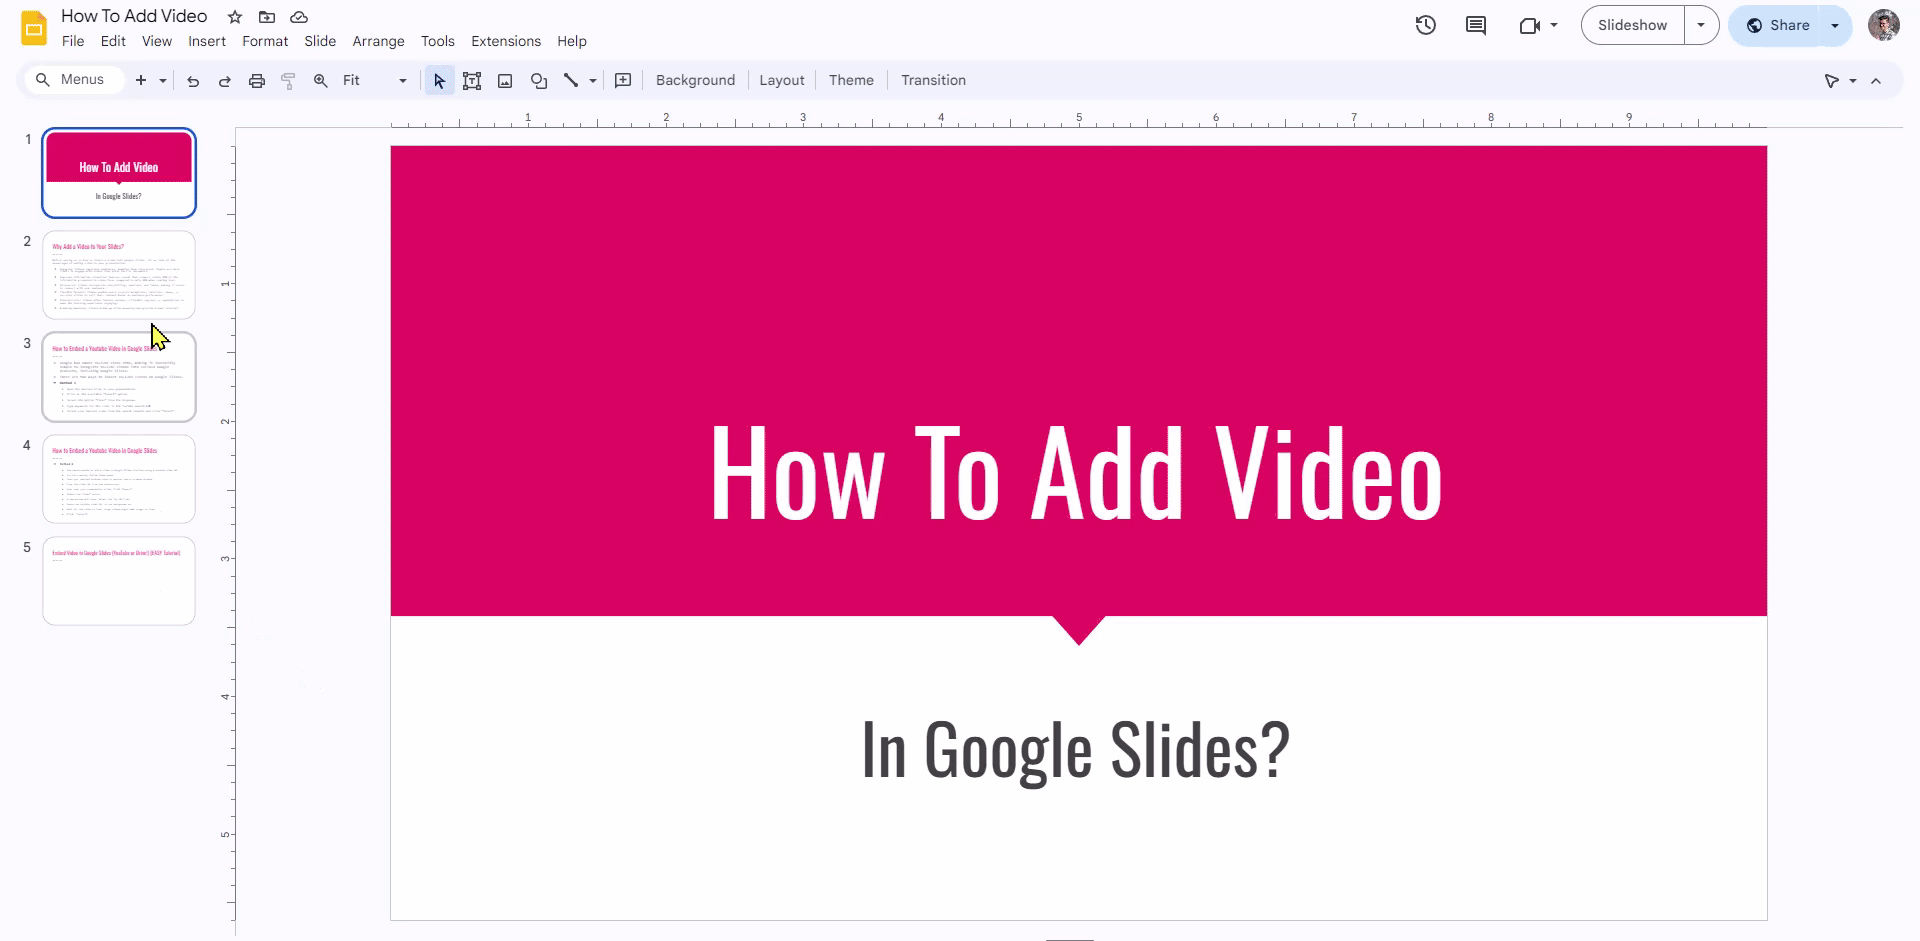 add video using youtube search bar